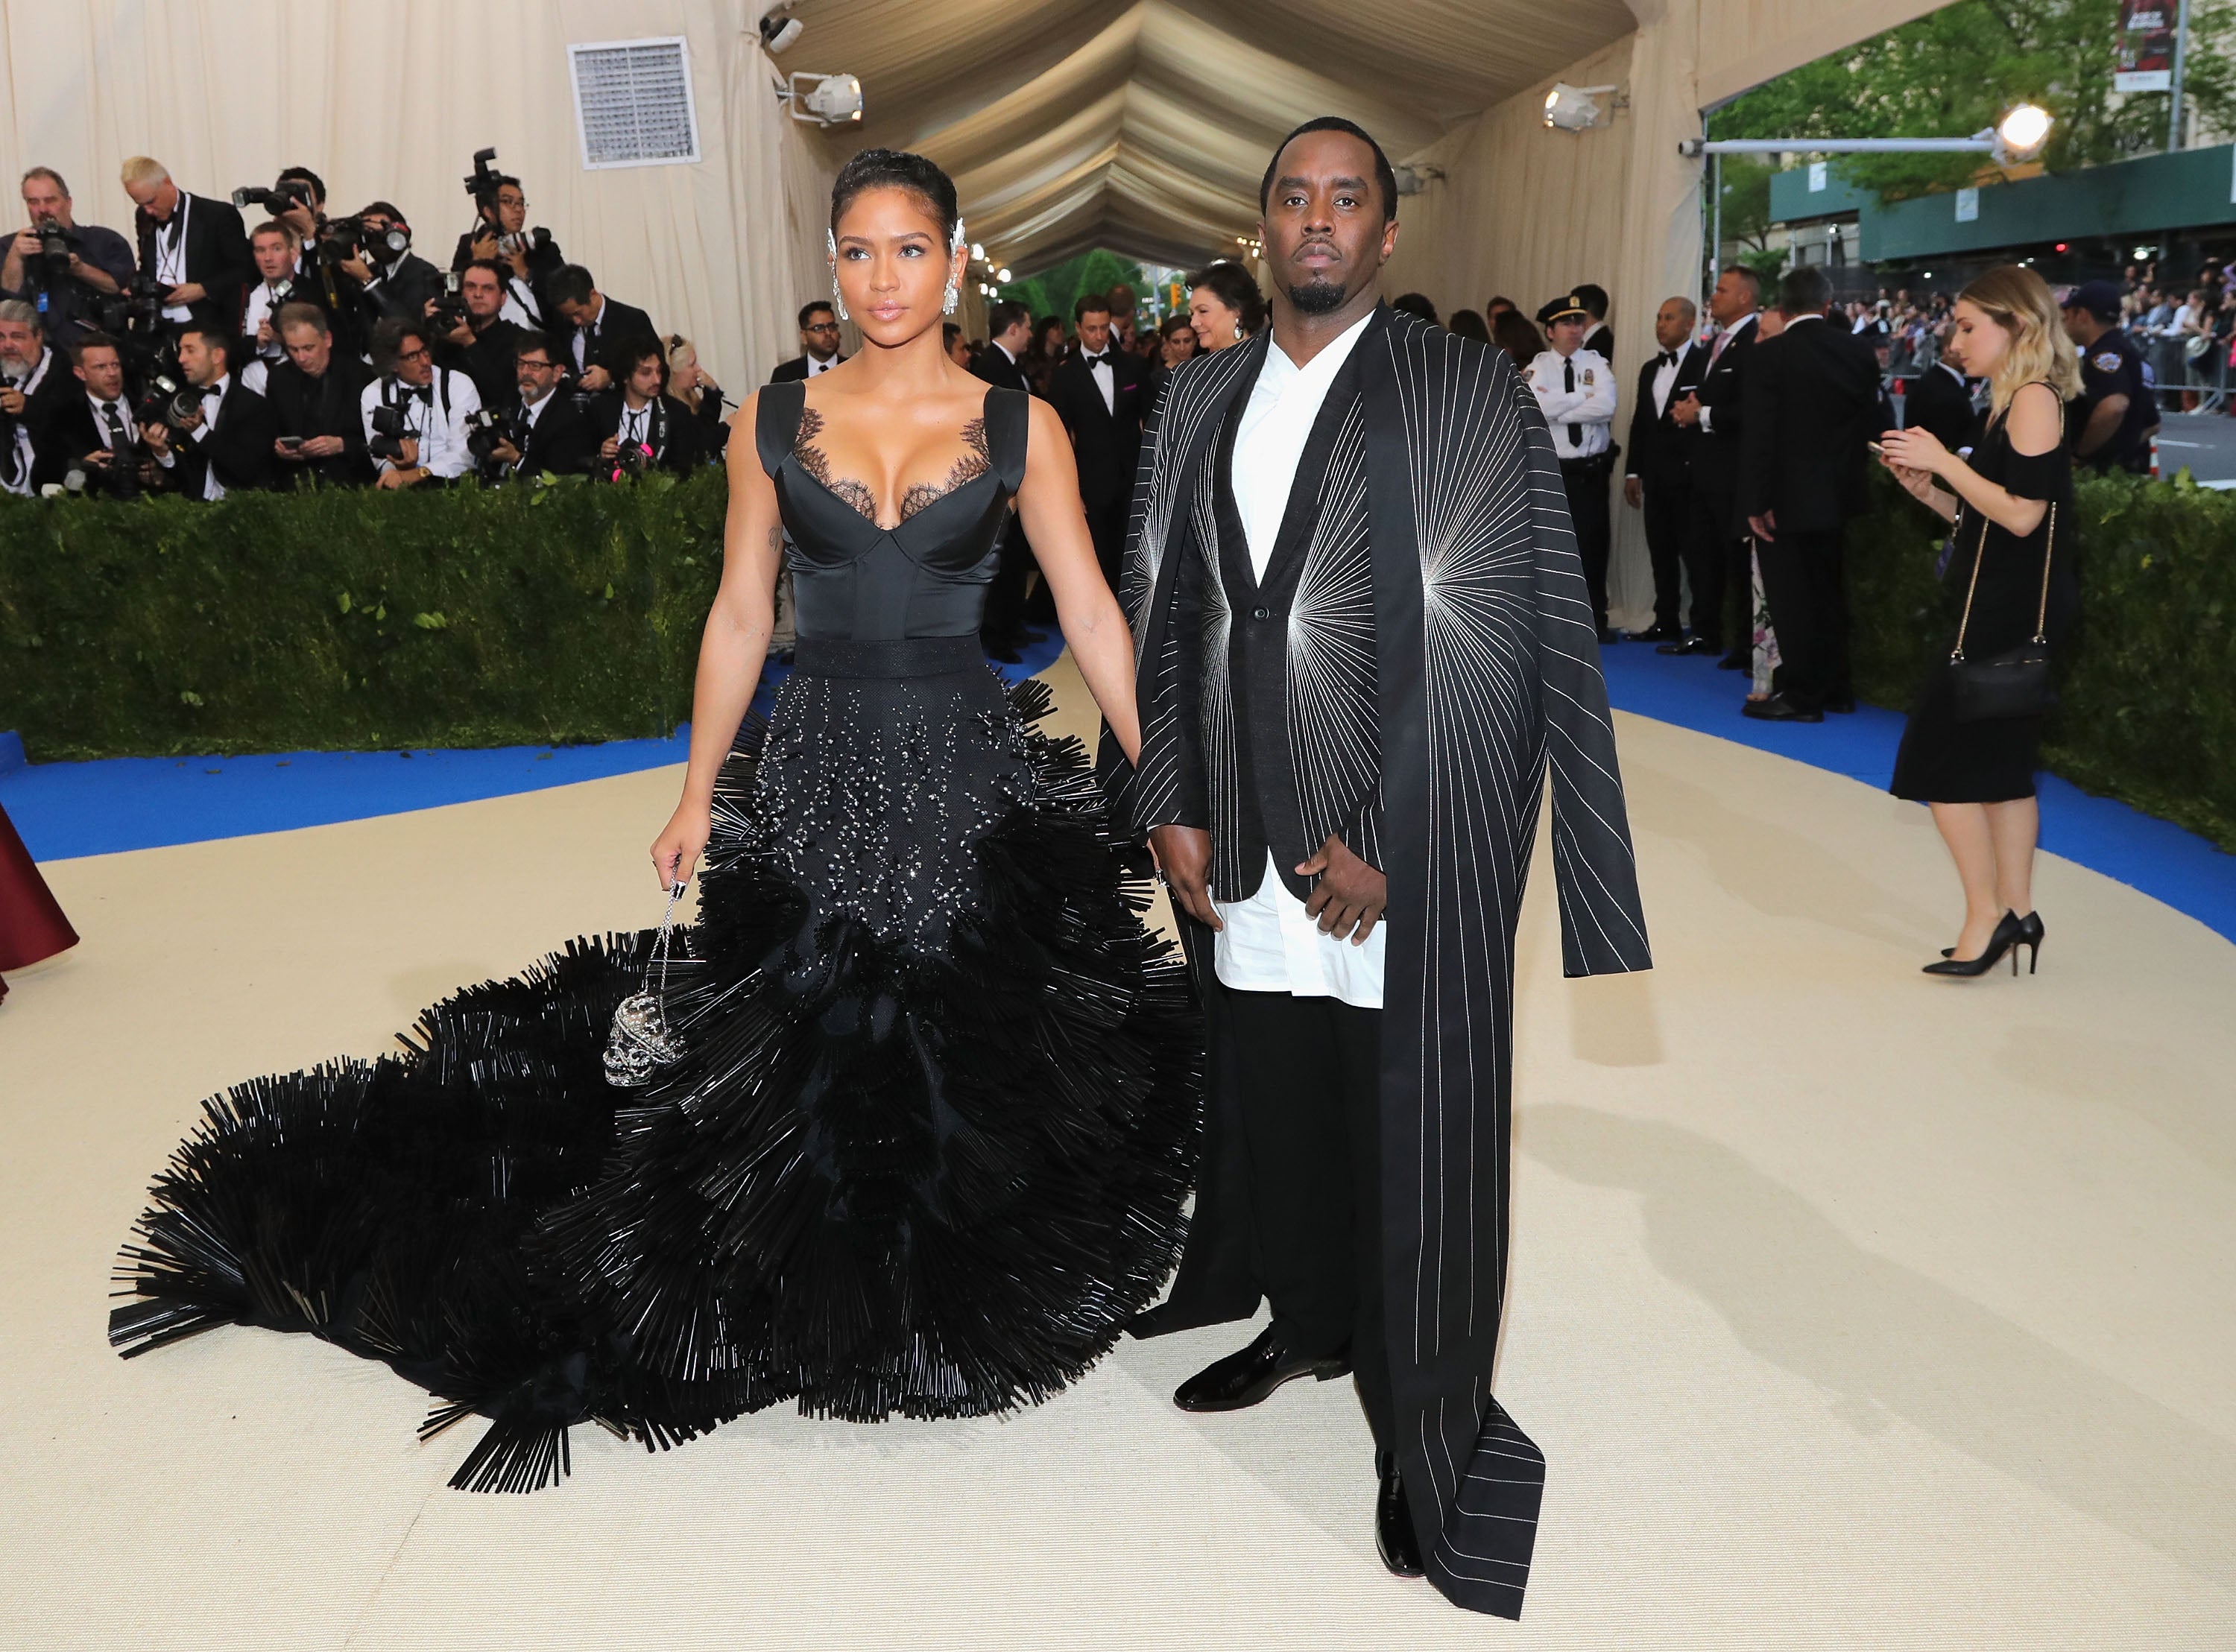 These Couples Slayed Date Night At The 2017 MET Gala